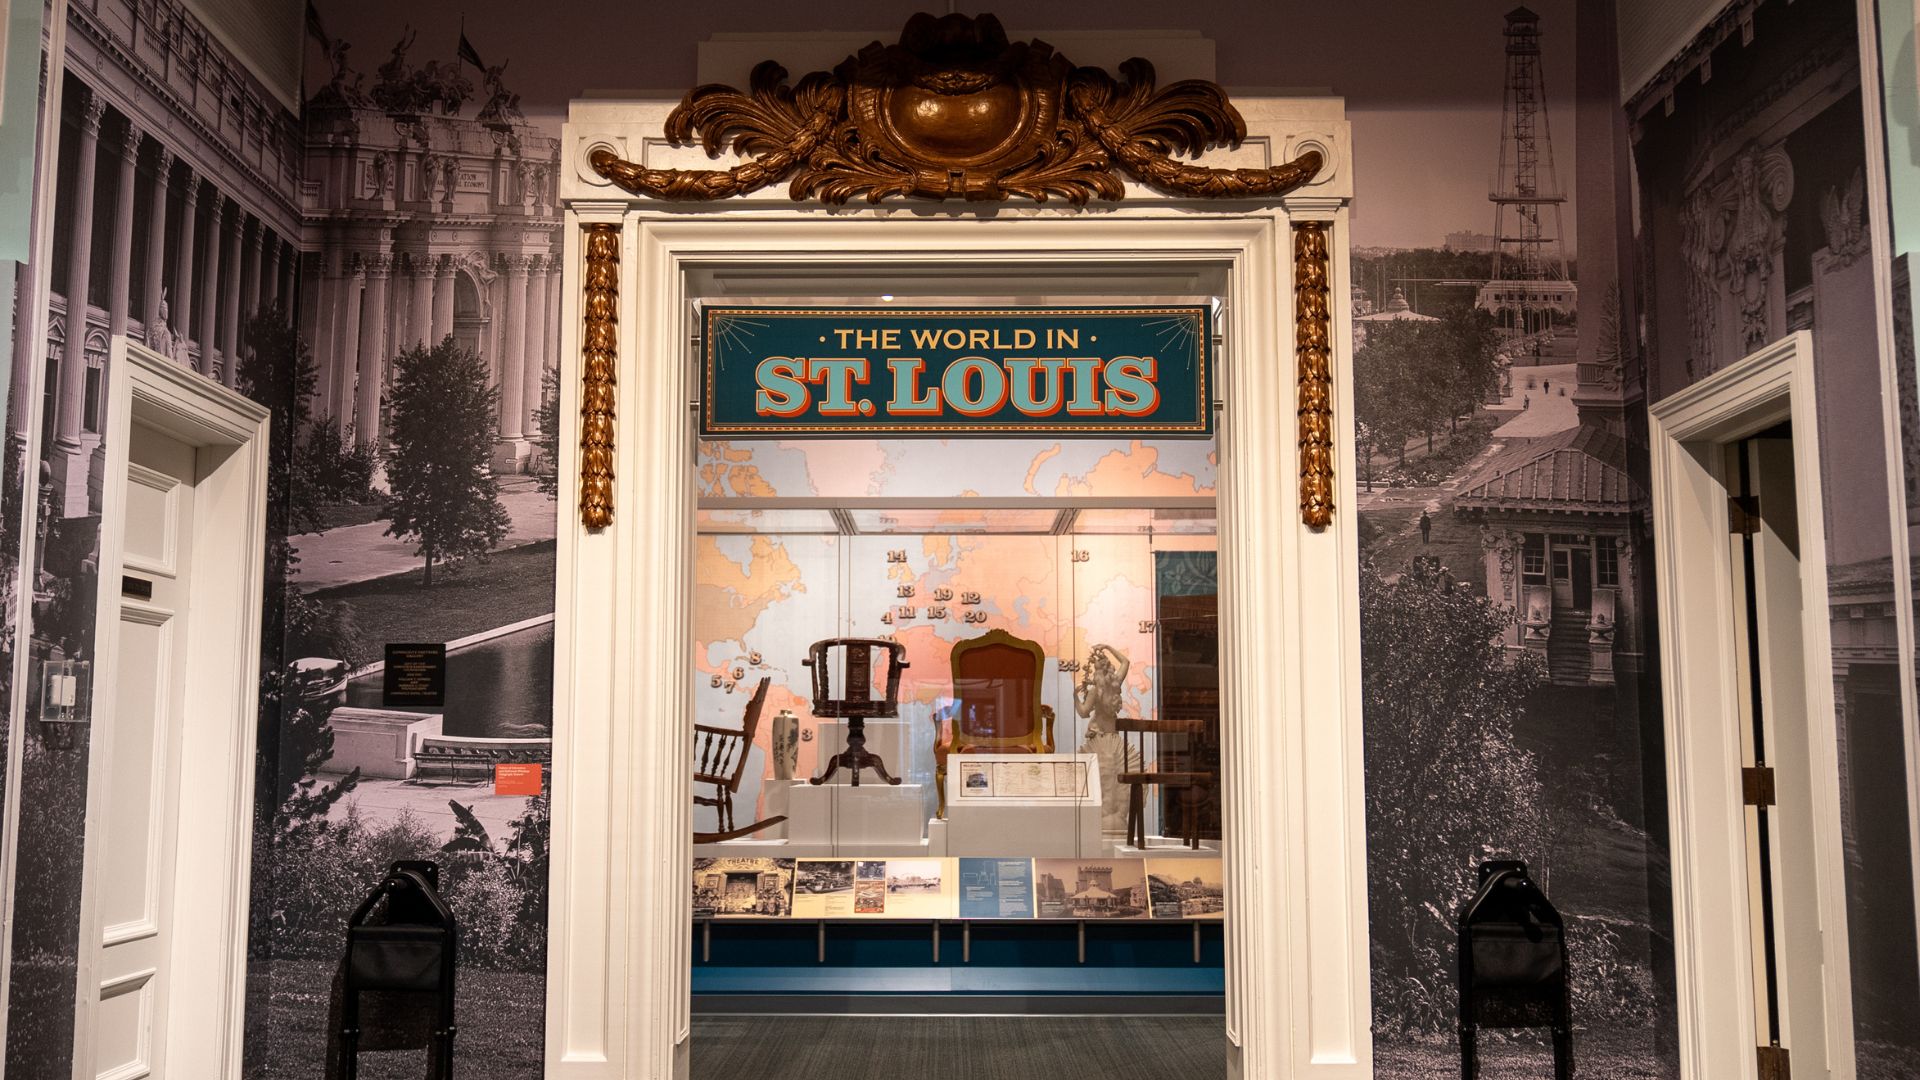 A refreshed and revamped 1904 World's Fair exhibit is open at the Missouri History Museum.